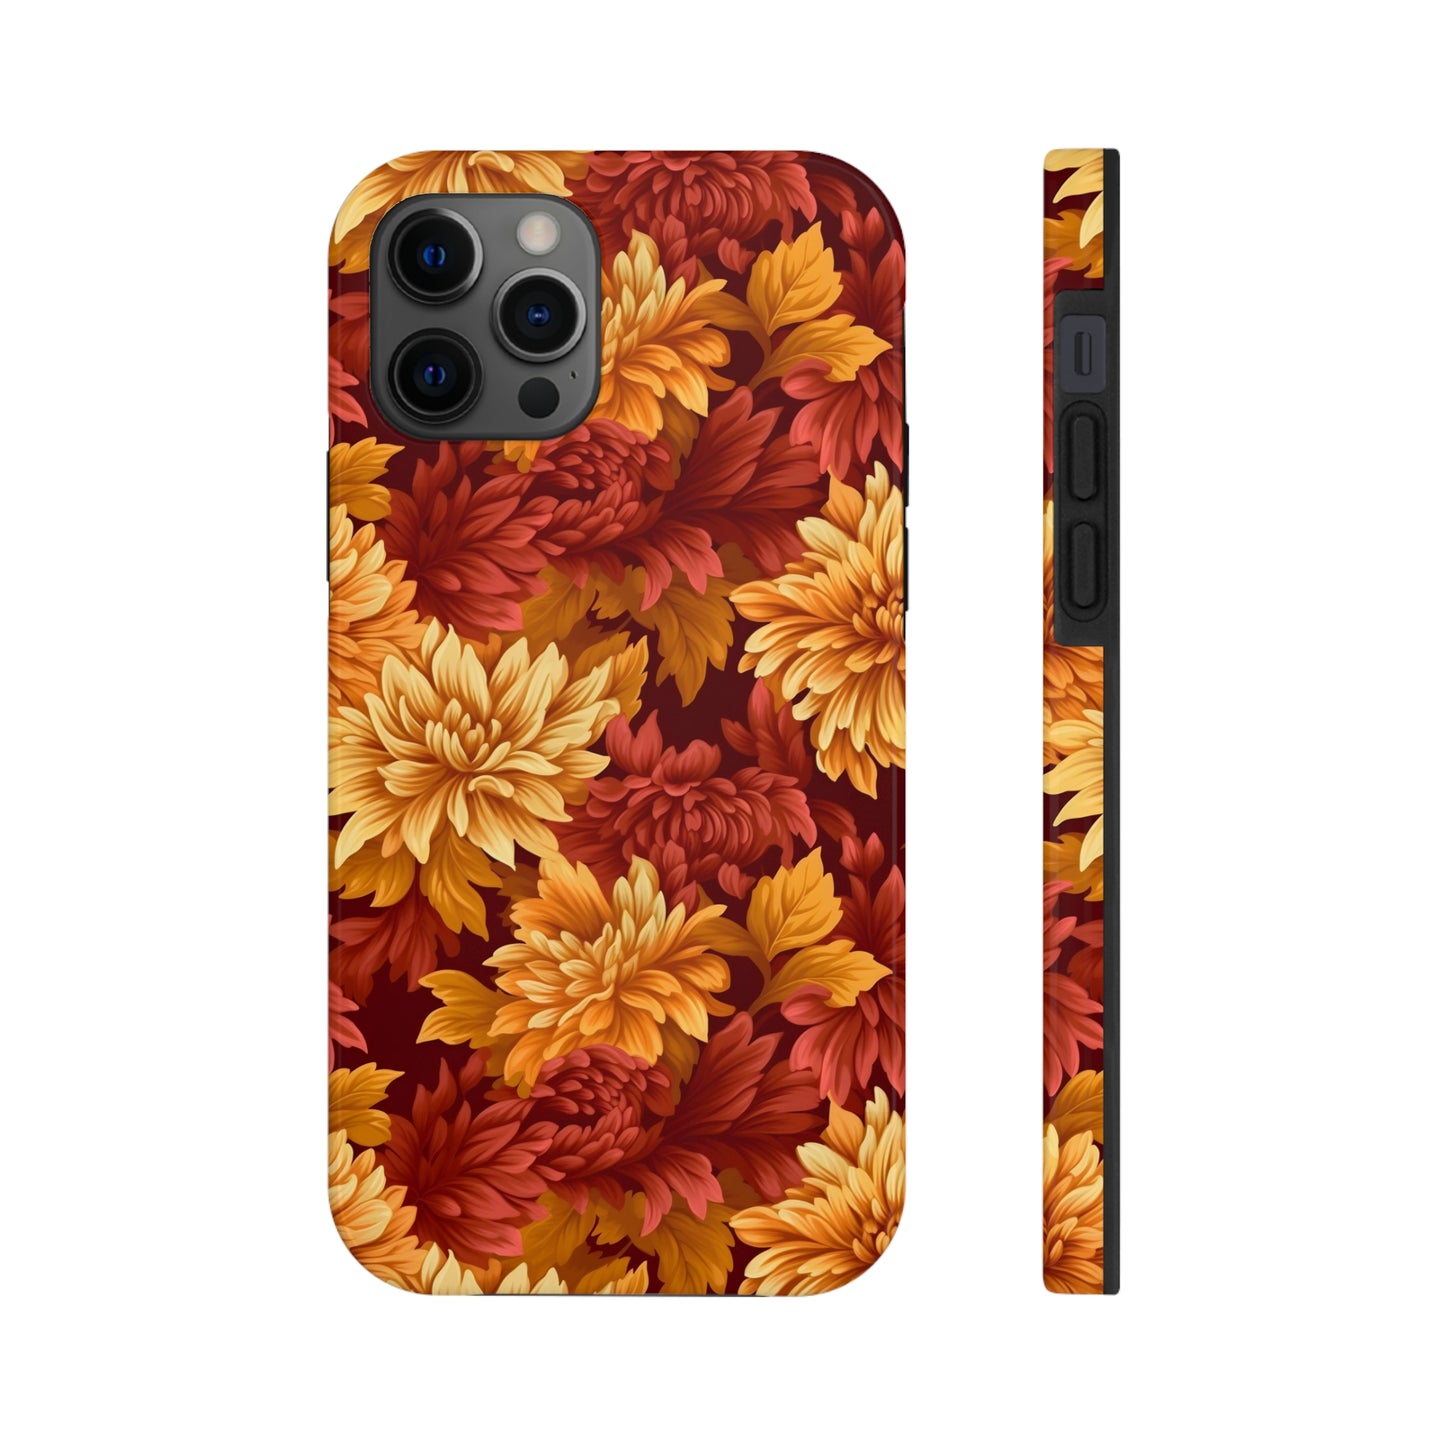 fall dahlia iphone case in red, yellow and brown dahlia print